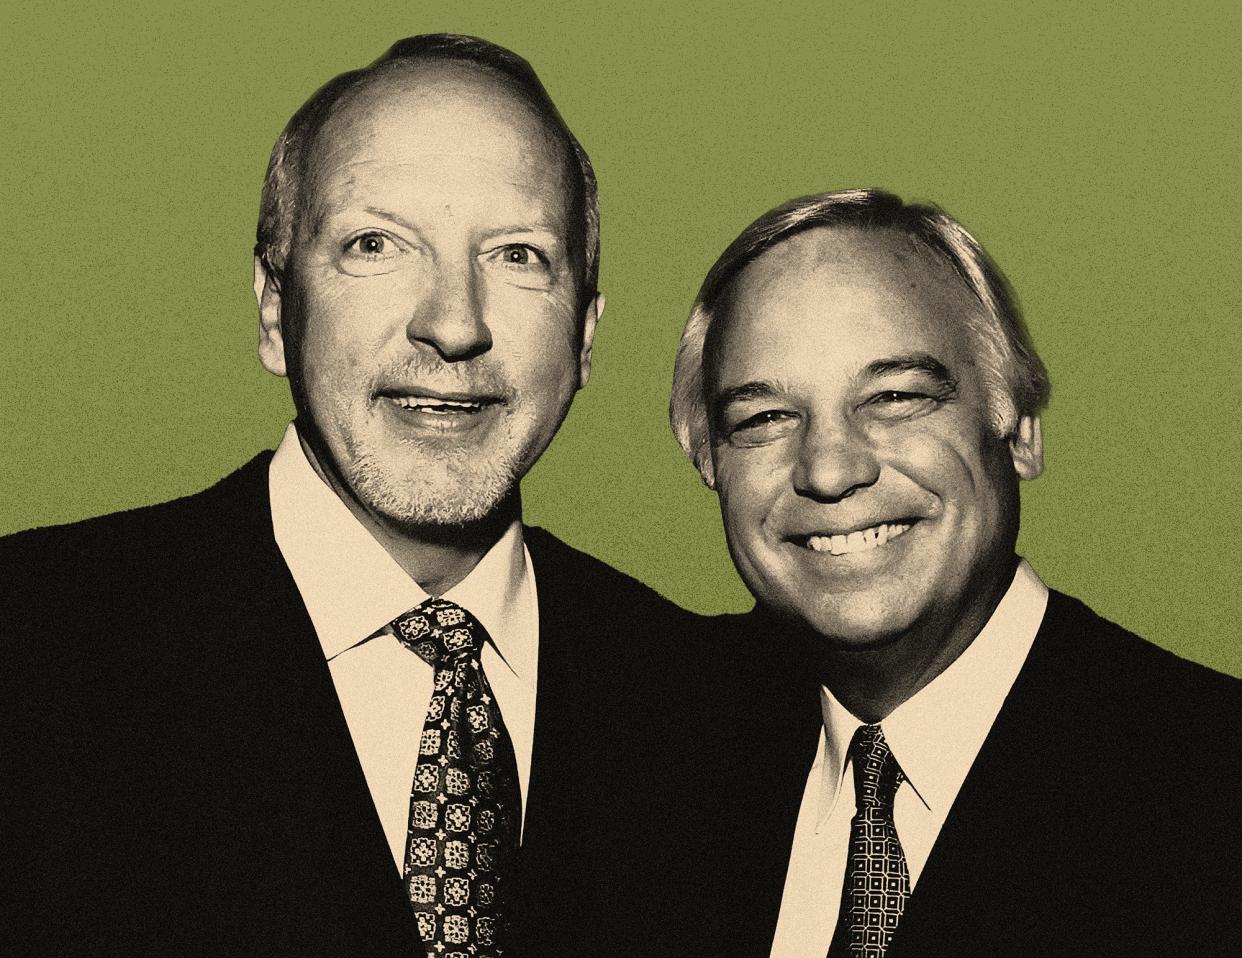 Jack Canfield and Mark Victor Hansen